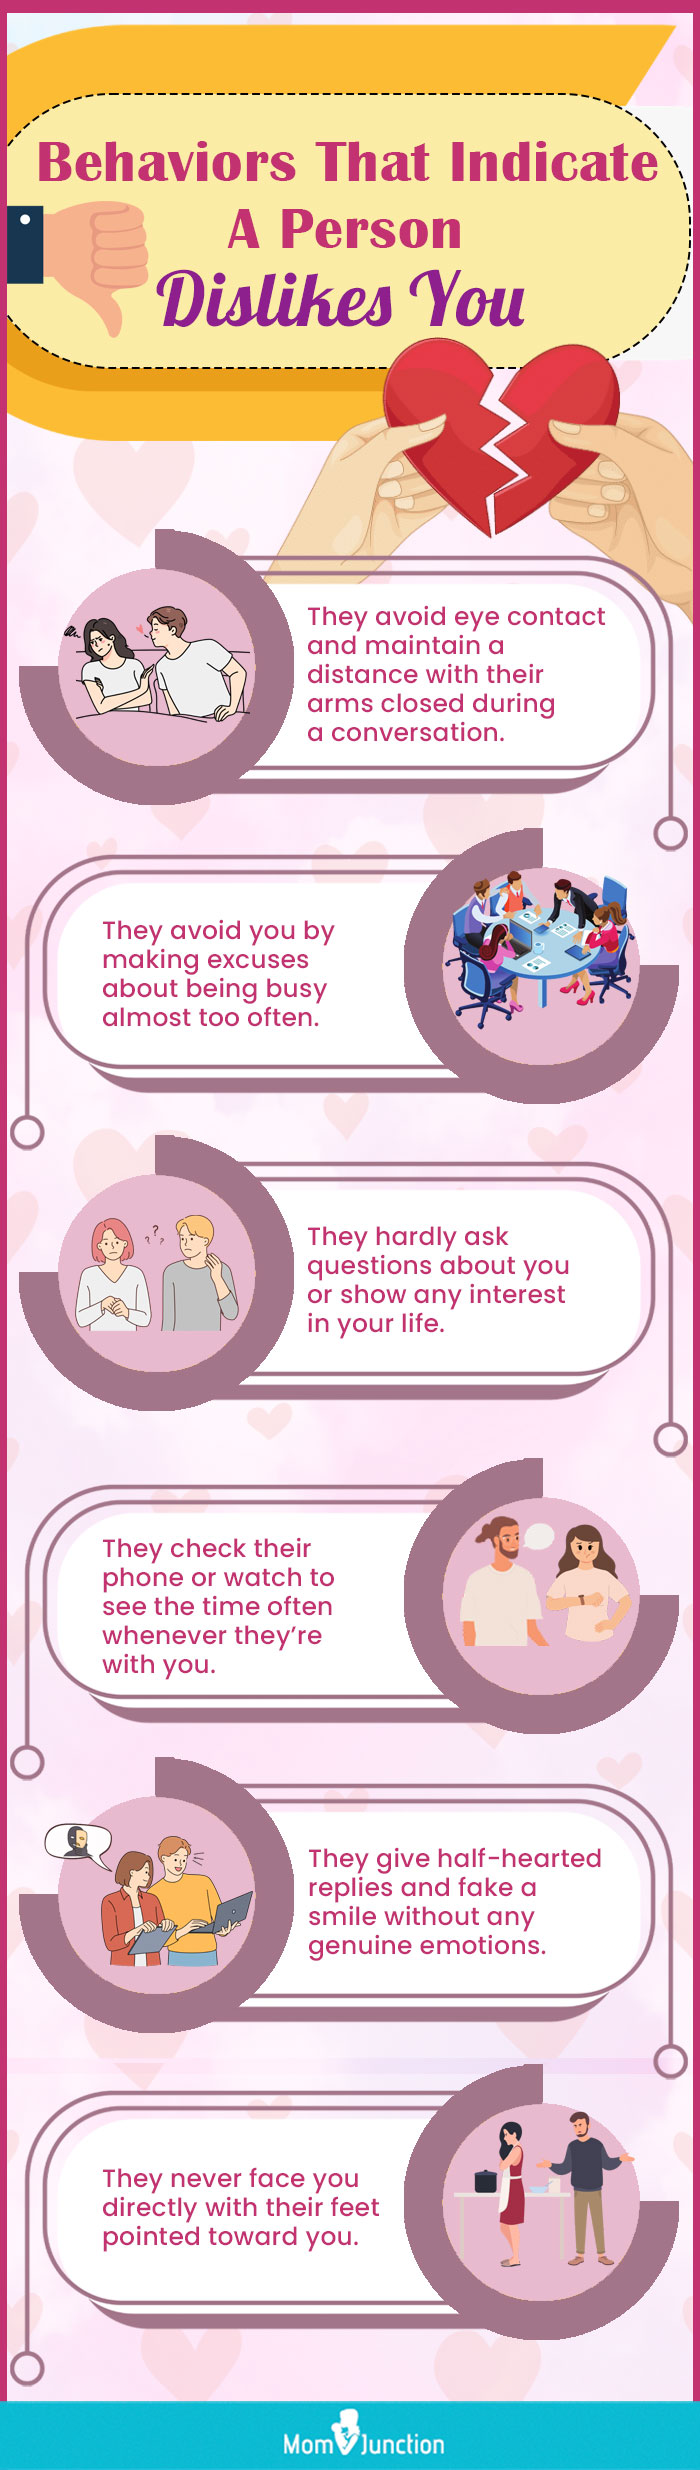 behaviors that indicate a person dislikes you (infographic)